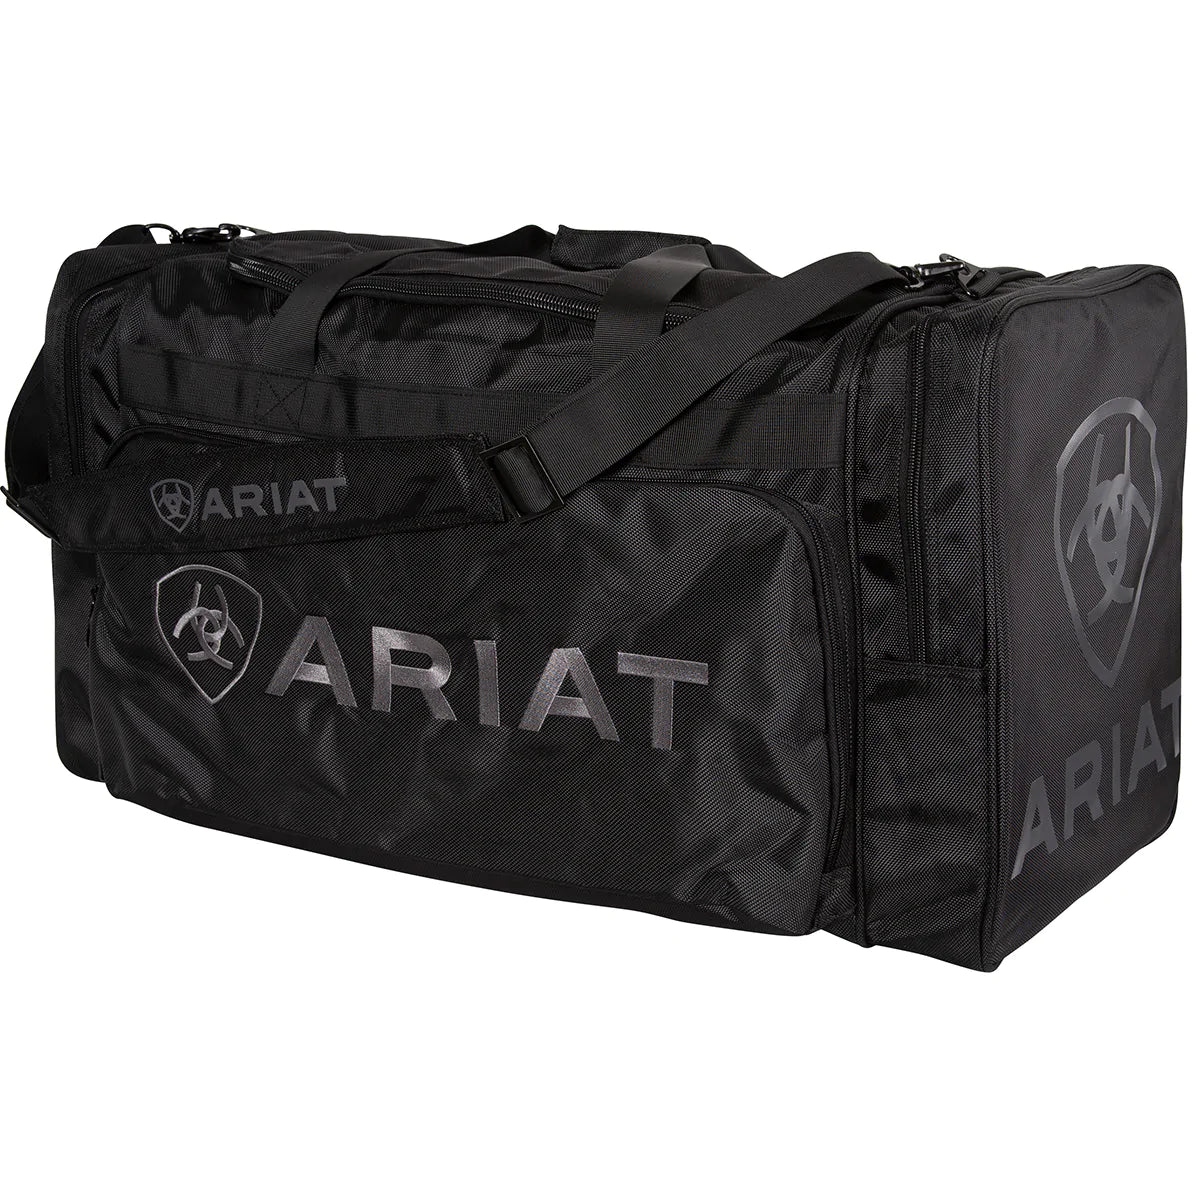 Ariat Heavy Duty Gear Bag Large assorted (3747998203981)